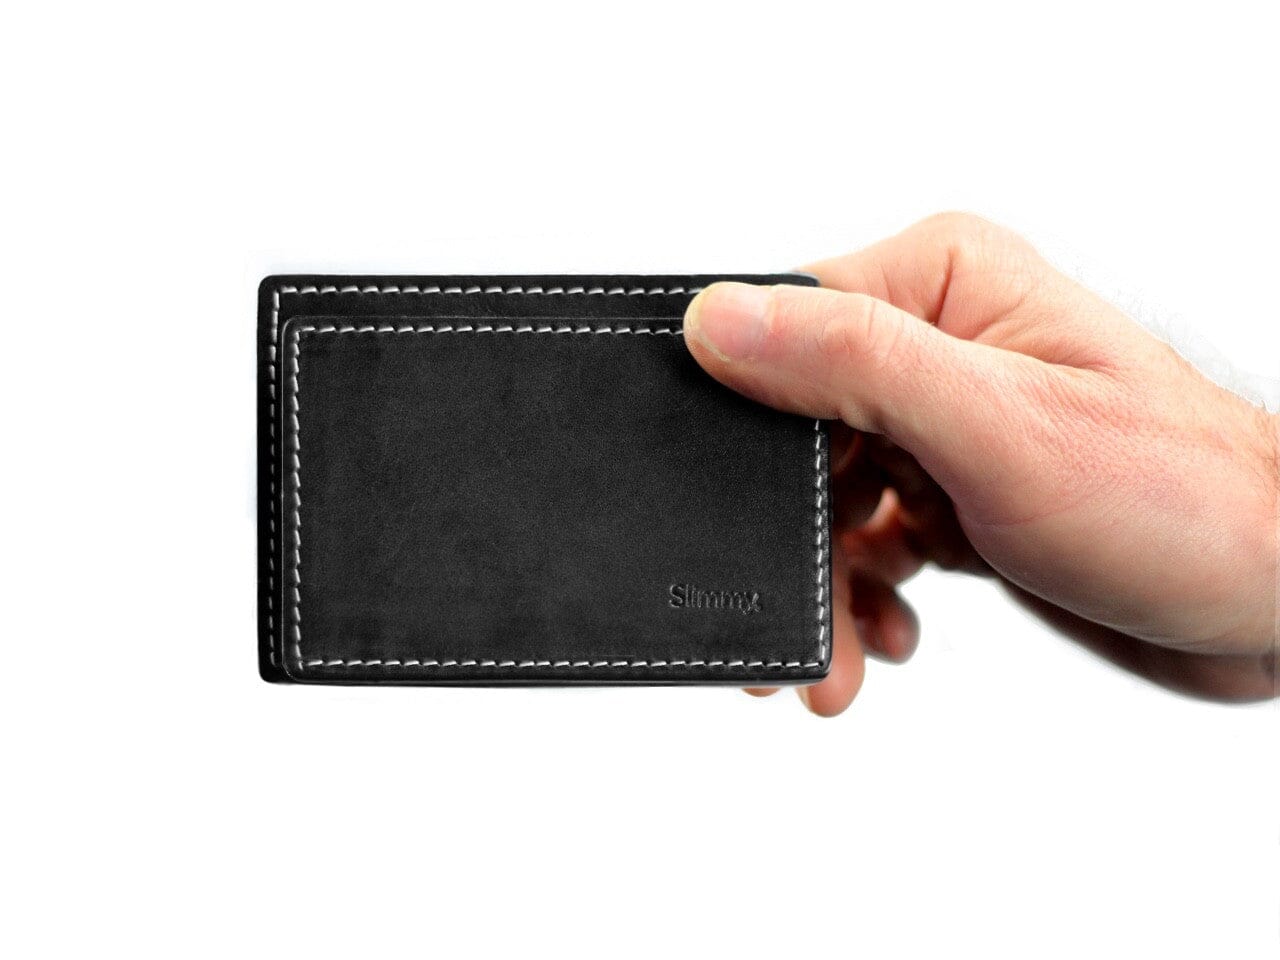 Slimmy Redux: The Mini Cooper of Wallets